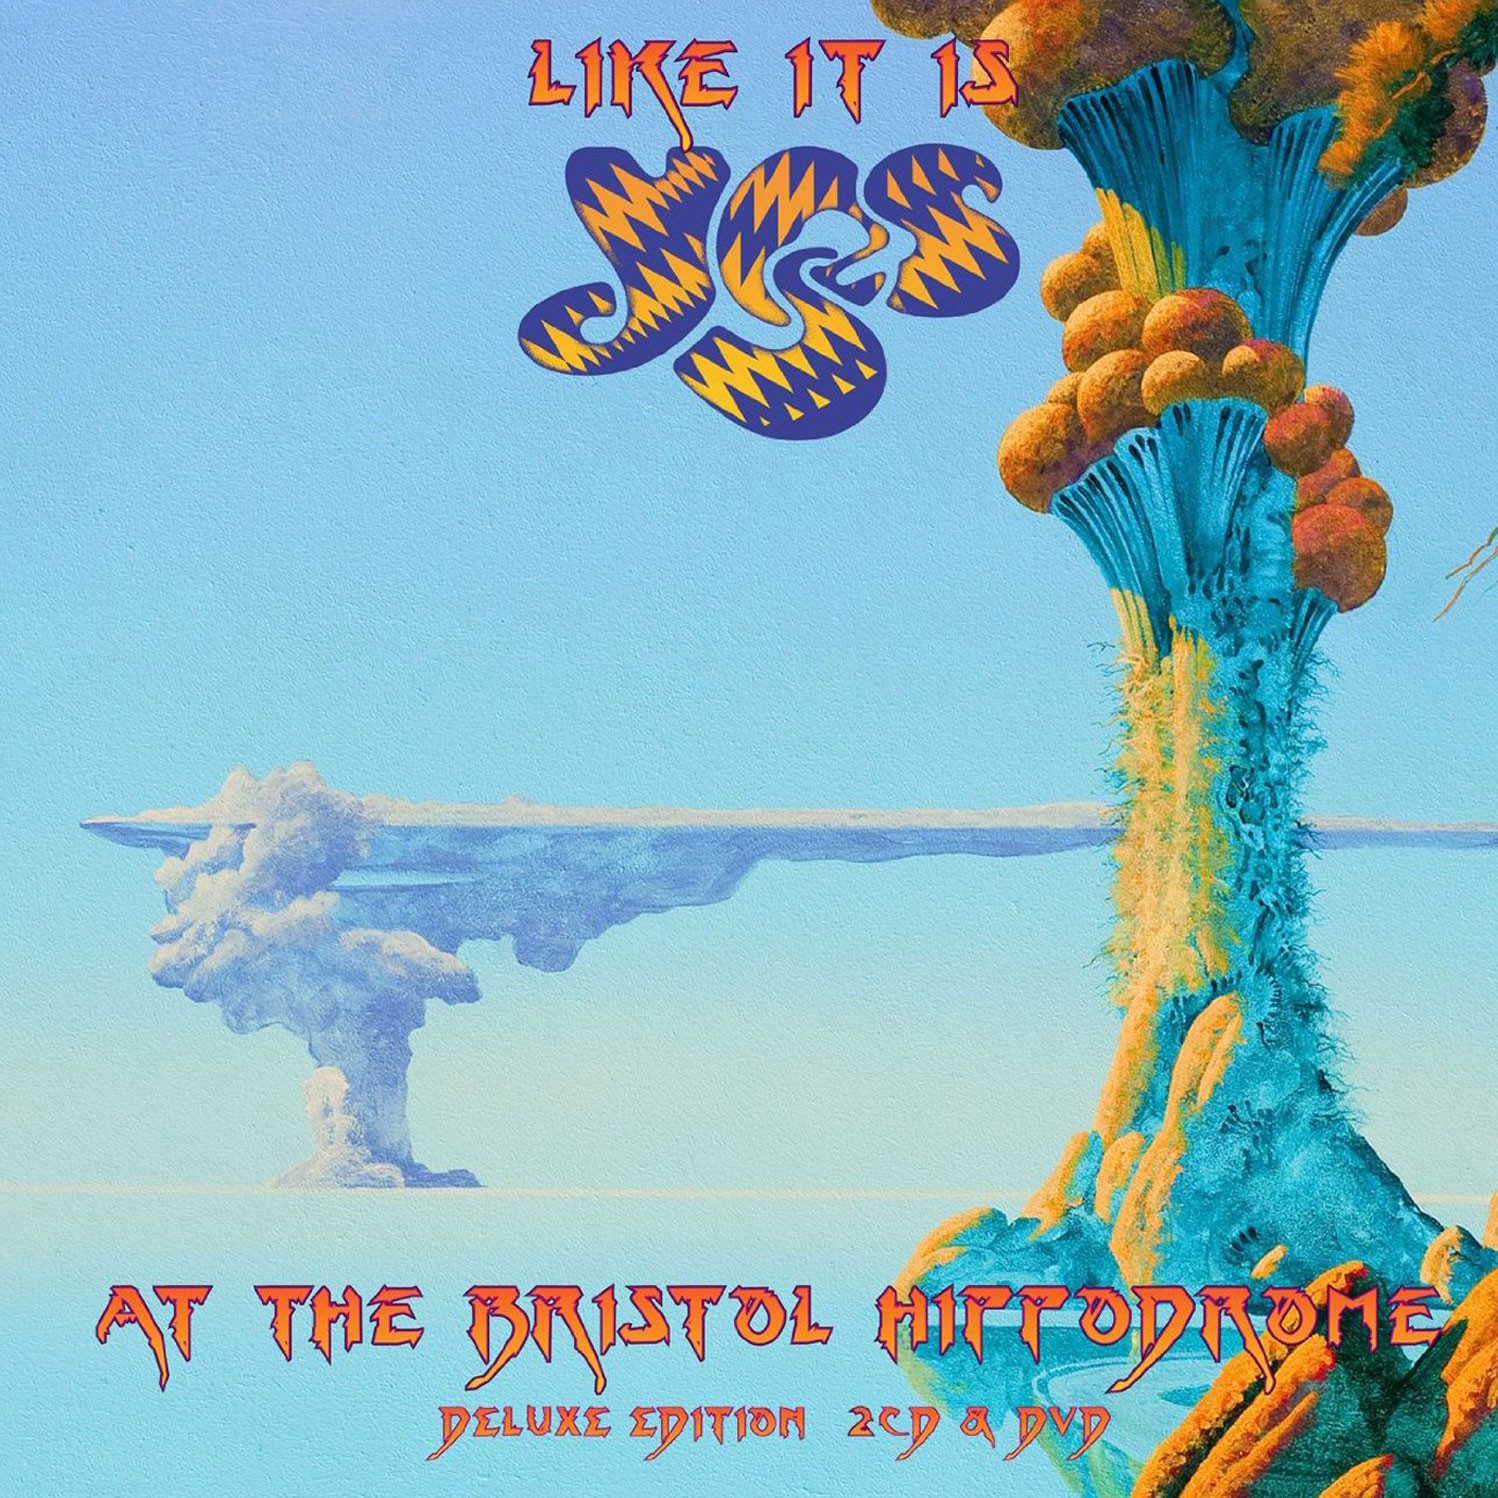 yes-like-it-is-live-at-the-bristol-hippodrome-album-cover